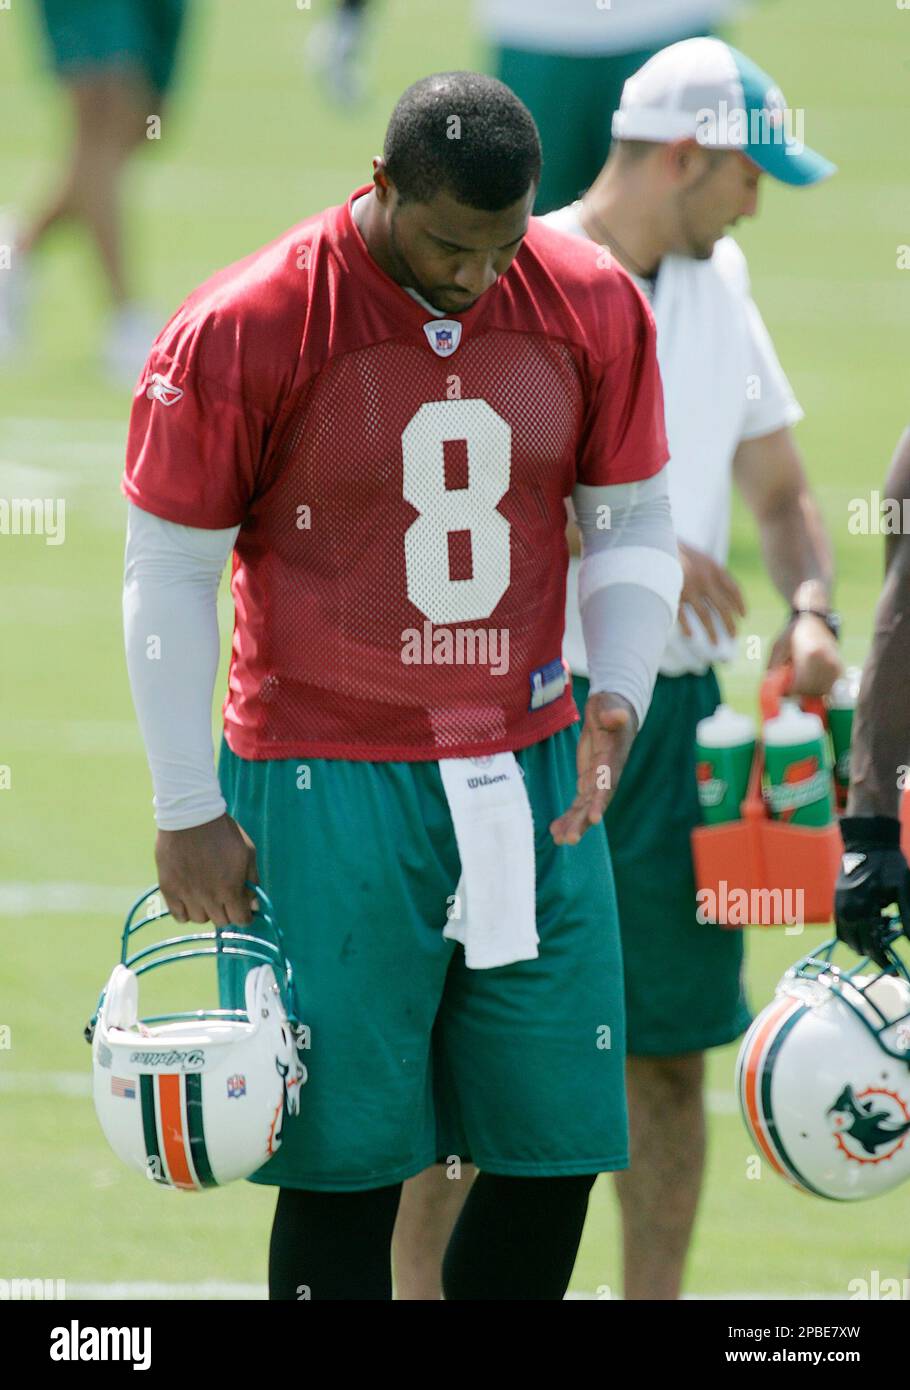 Miami Dolphins quarterback Daunte Culpepper reacts after passing the  football during the first day of football mini-camp in Davie, Fla. Friday,  June 8,2 007. Moments later he left the practice field.(AP Photo/J.